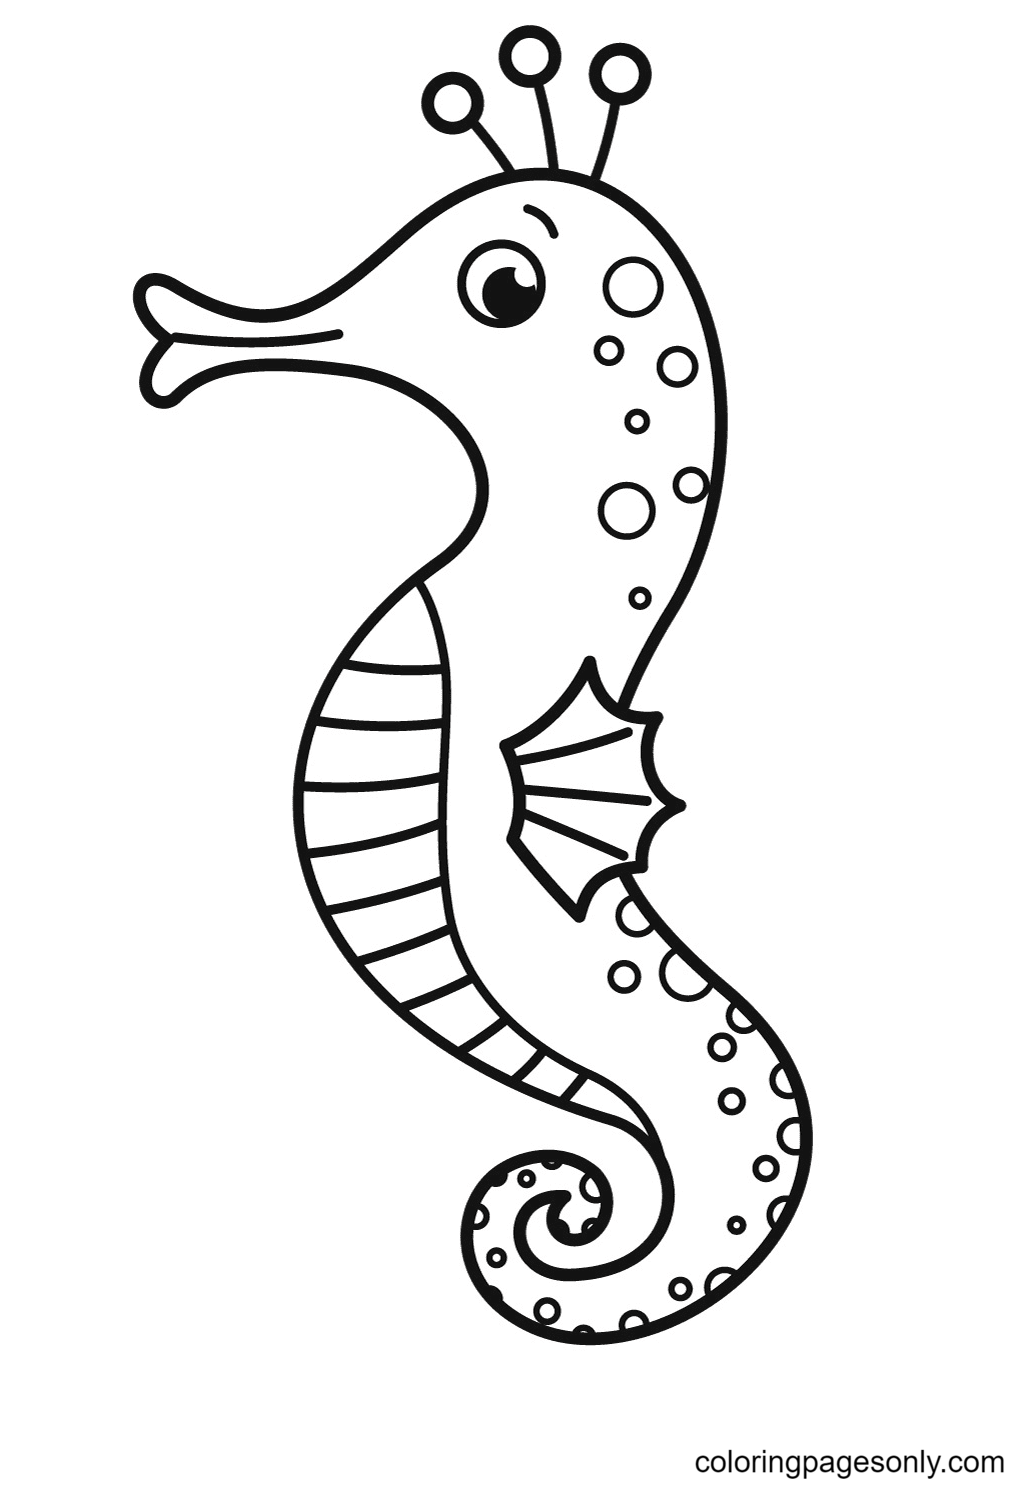 Lovely Seahorse from Seahorse